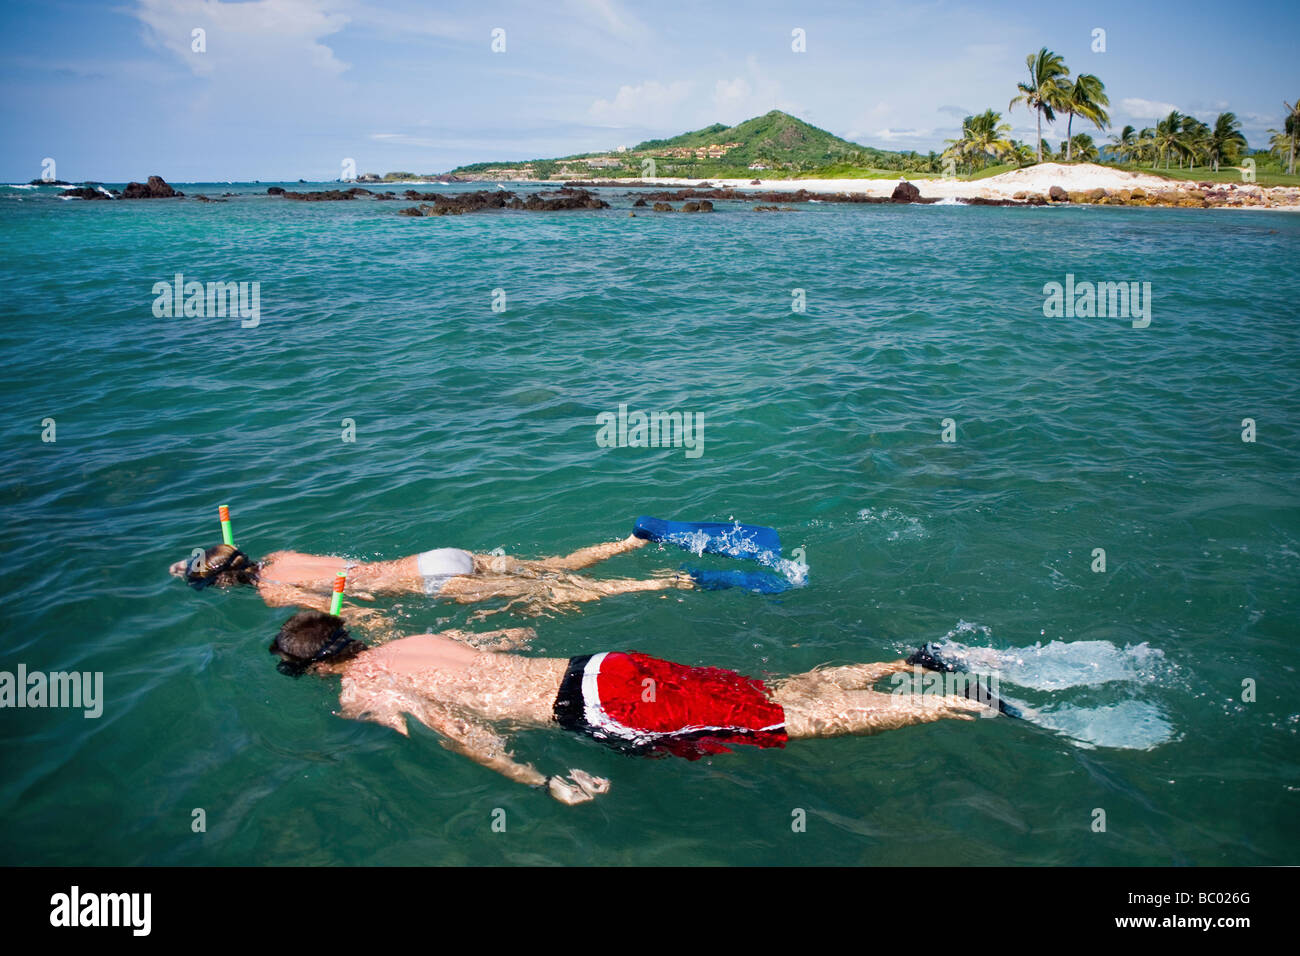 Couple snorkeling in tropical water. Stock Photo